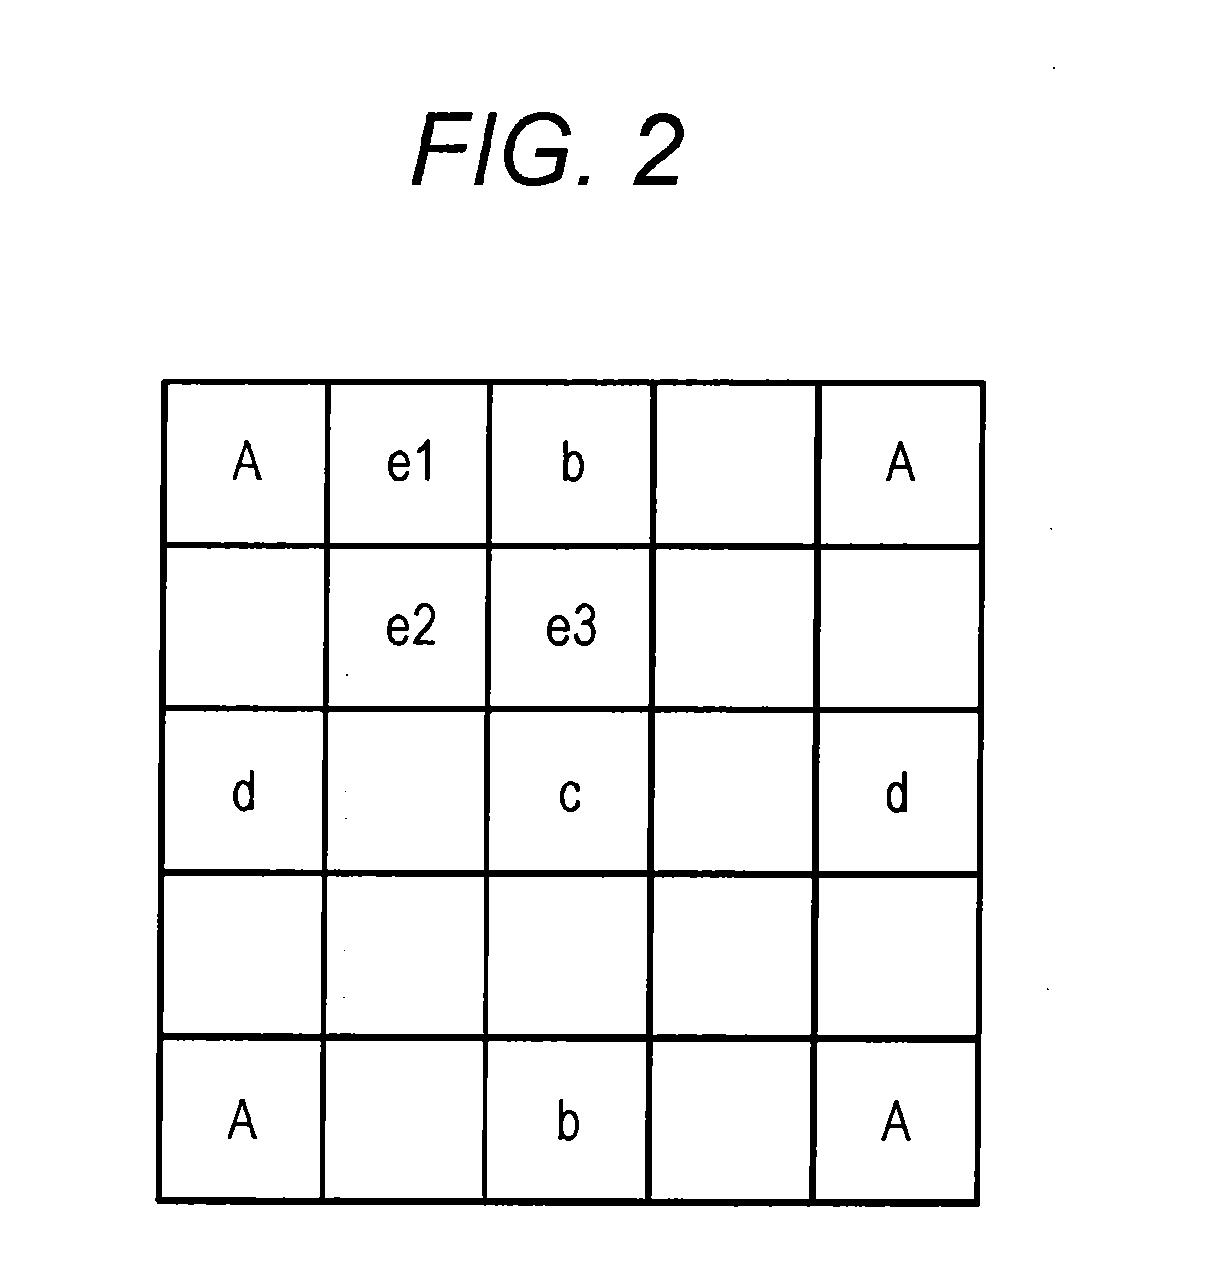 Image processing device, and image processing method